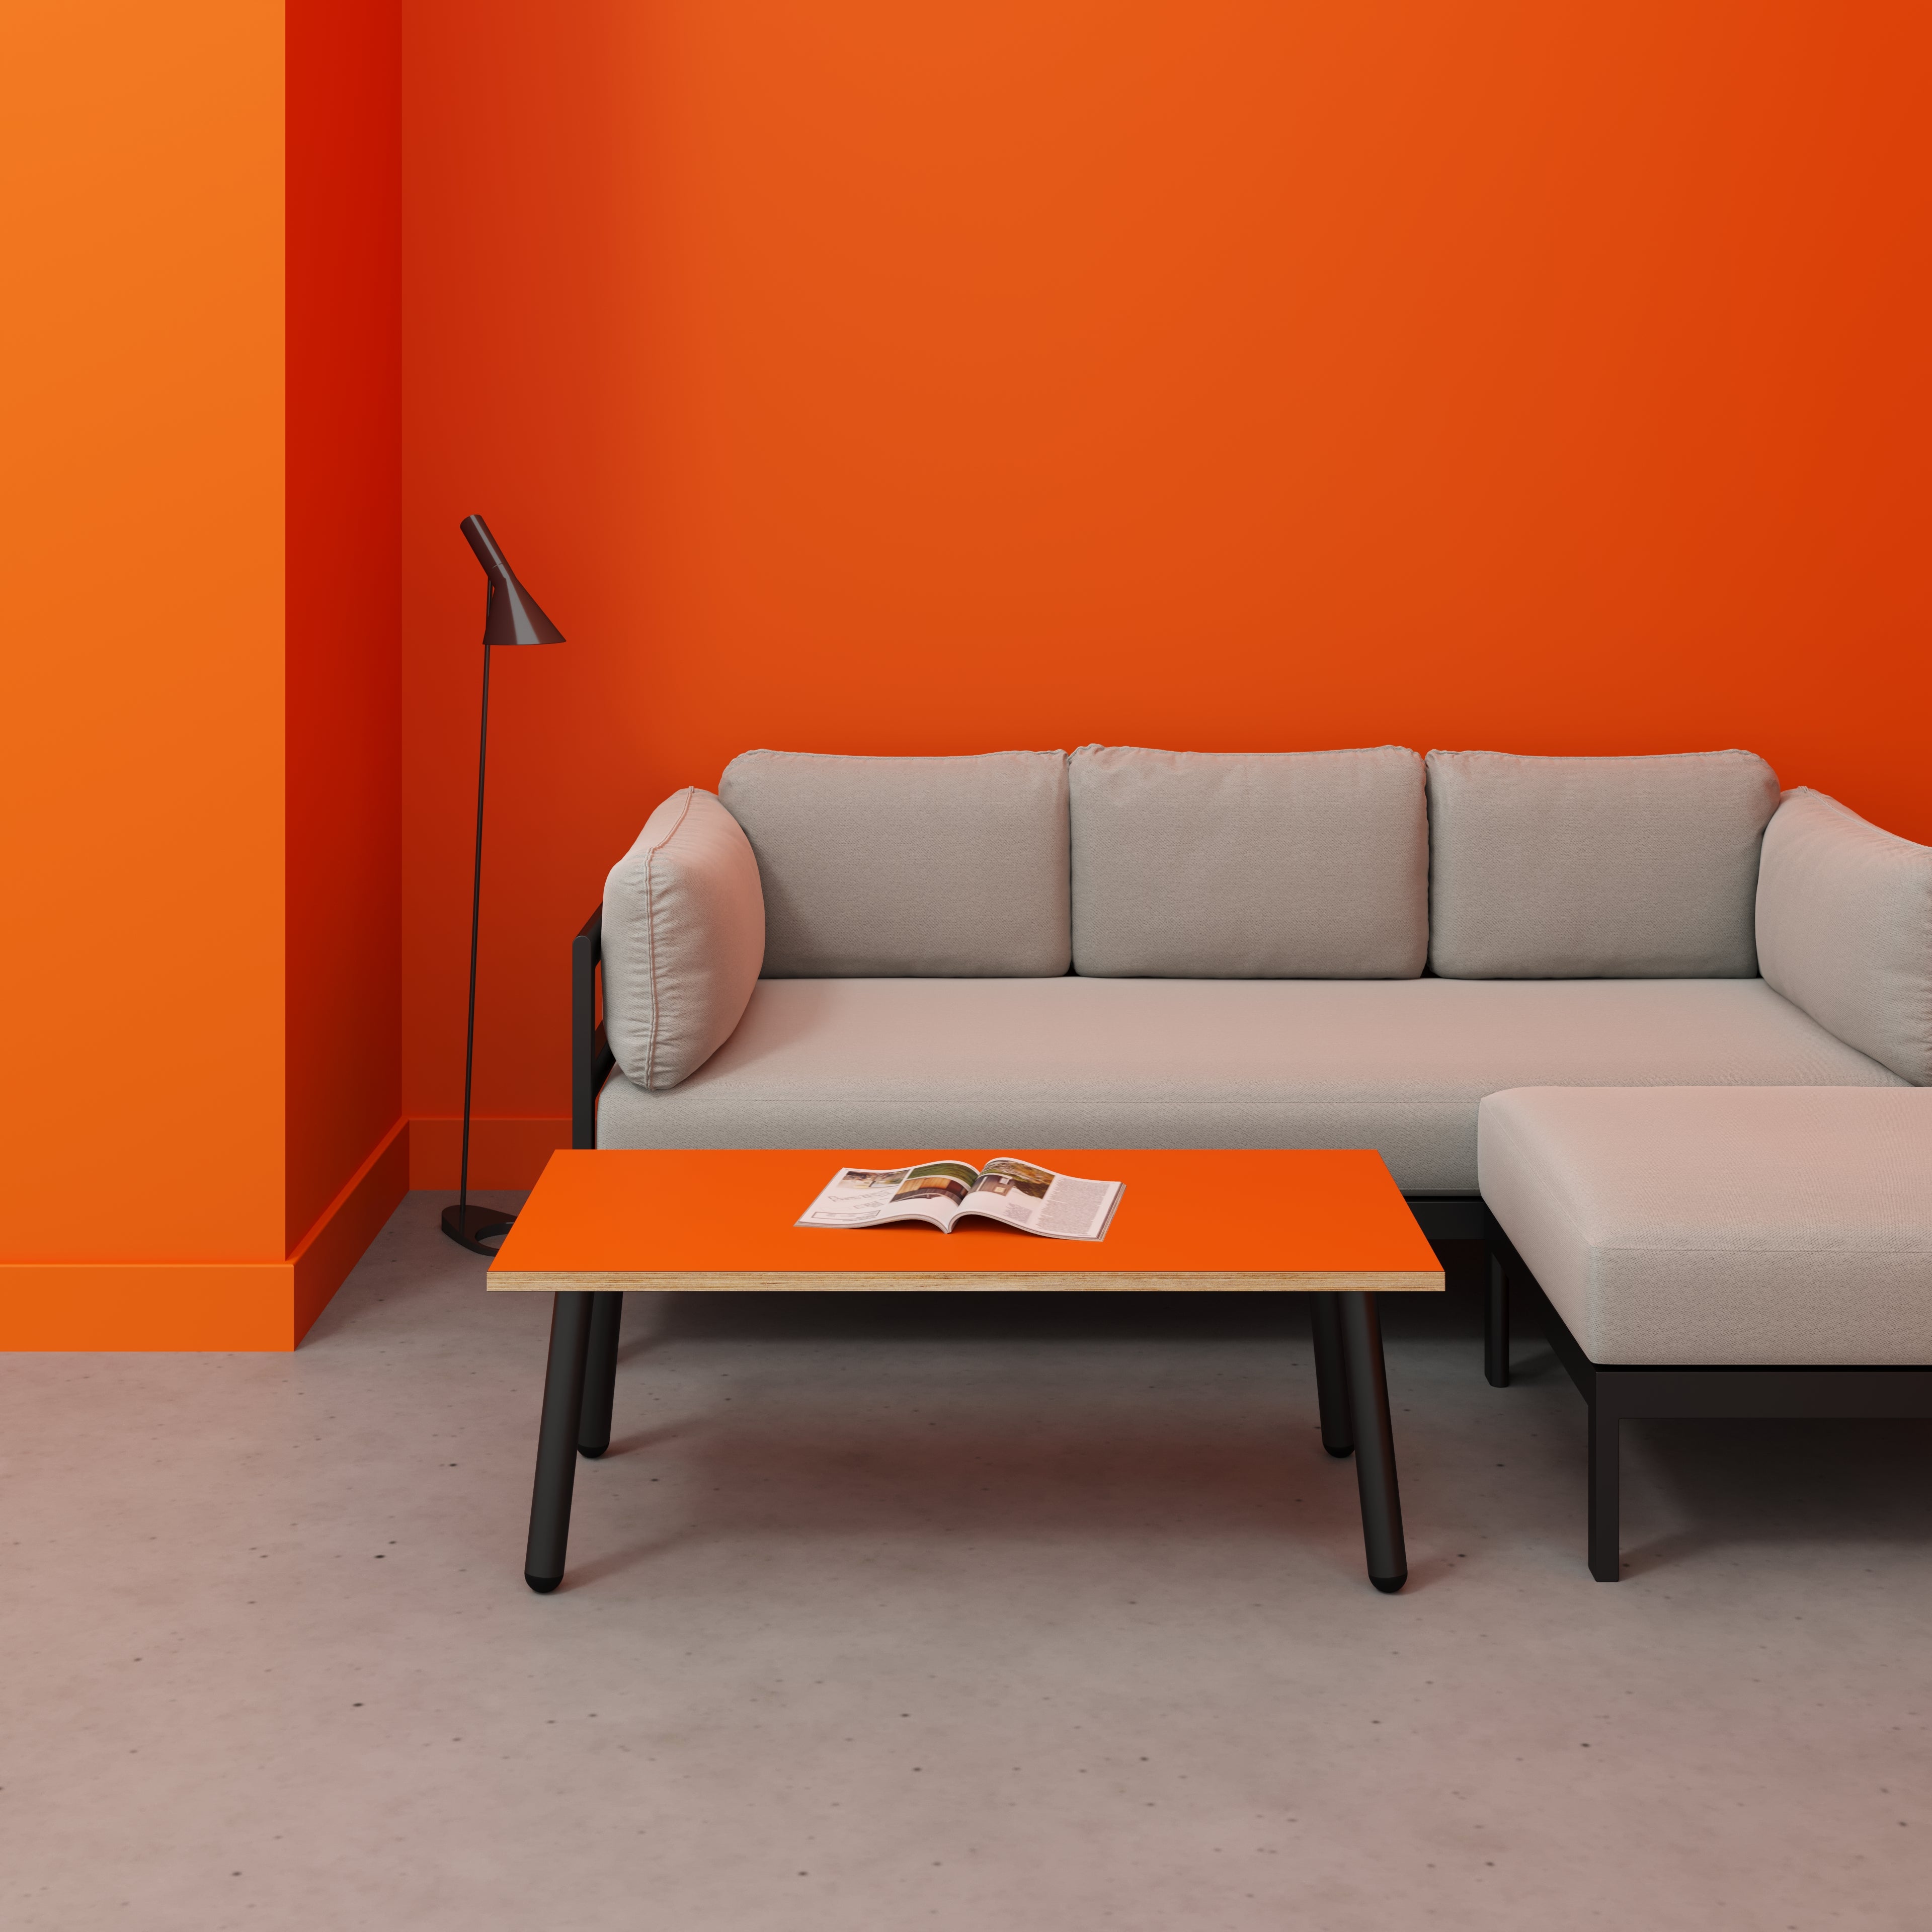 Coffee Table with Black Round Single Pin Legs - Formica Levante Orange - 1200(w) x 600(d) x 425(h)